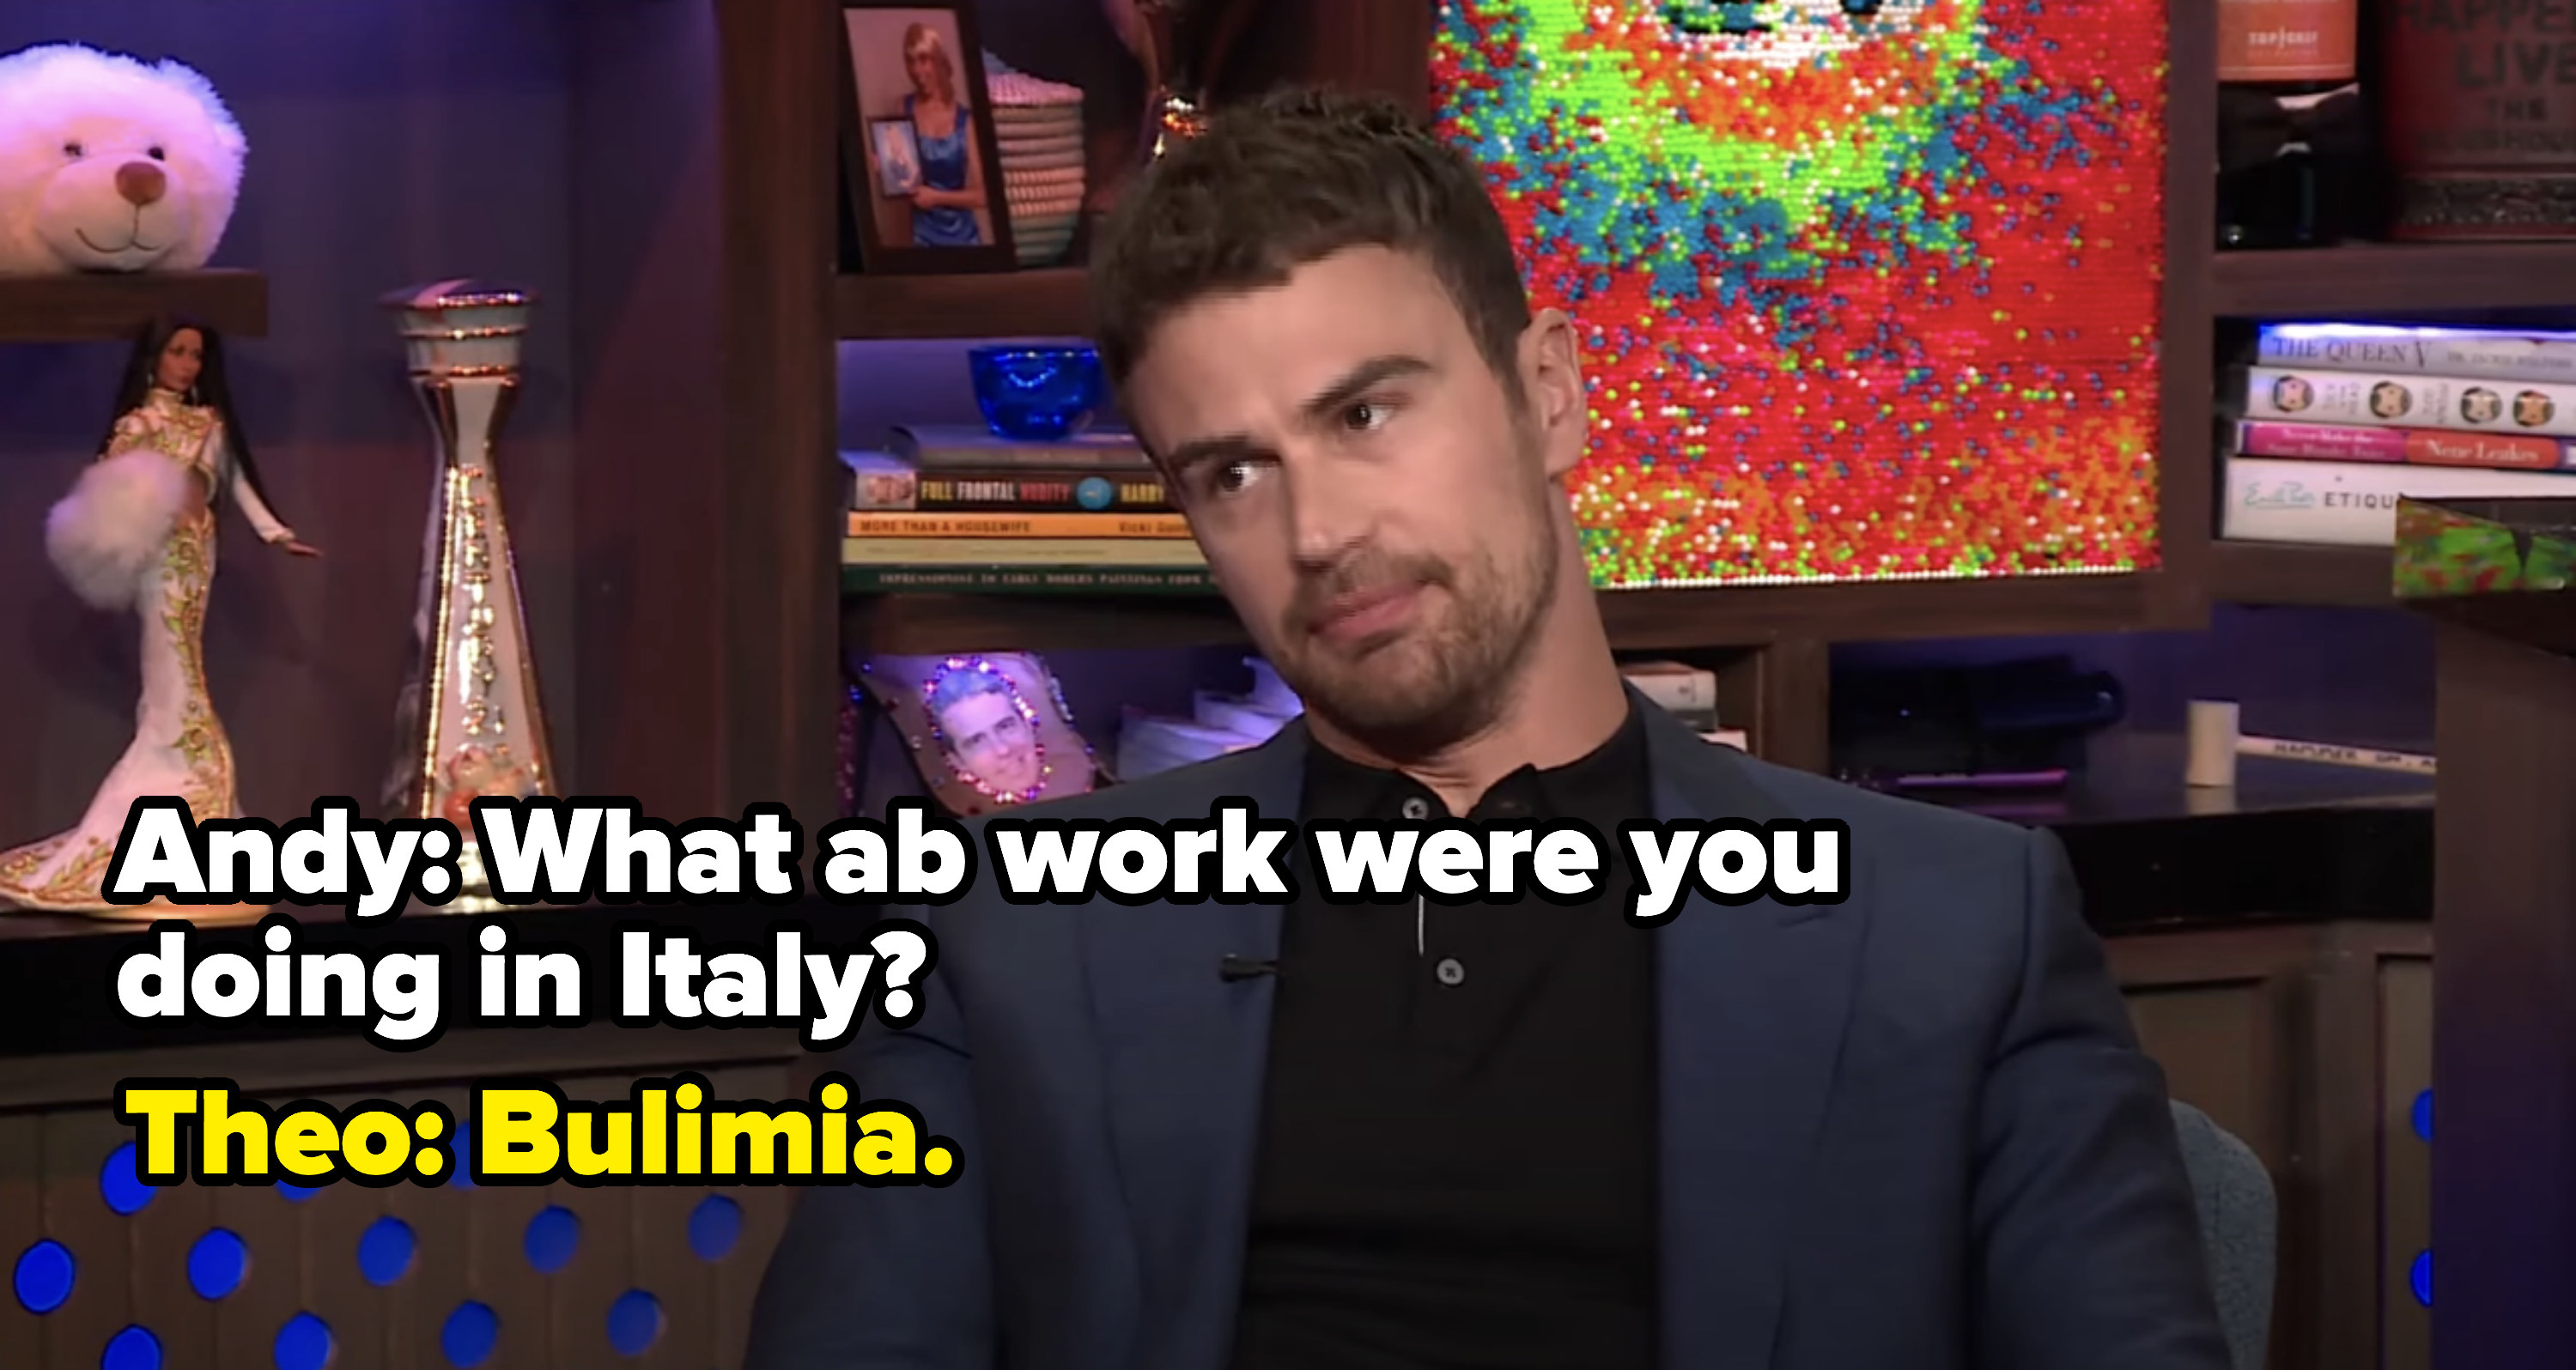 Andy: What ab work were you doing in Italy? Theo: Bulimia